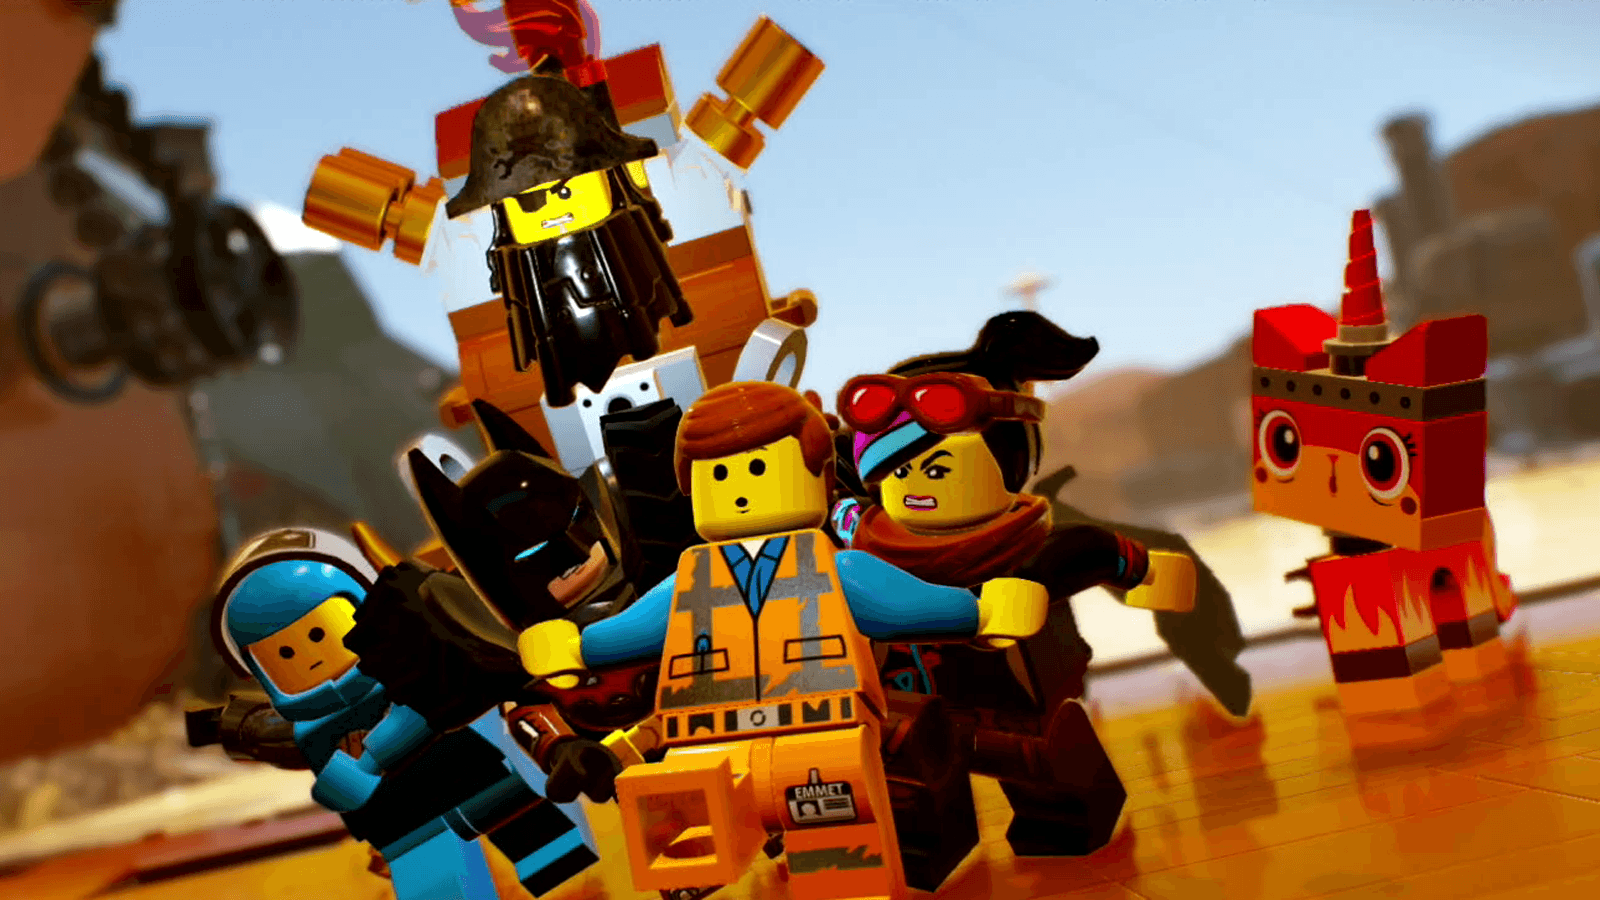 The LEGO Movie 2 Videogame Hands On Impressions